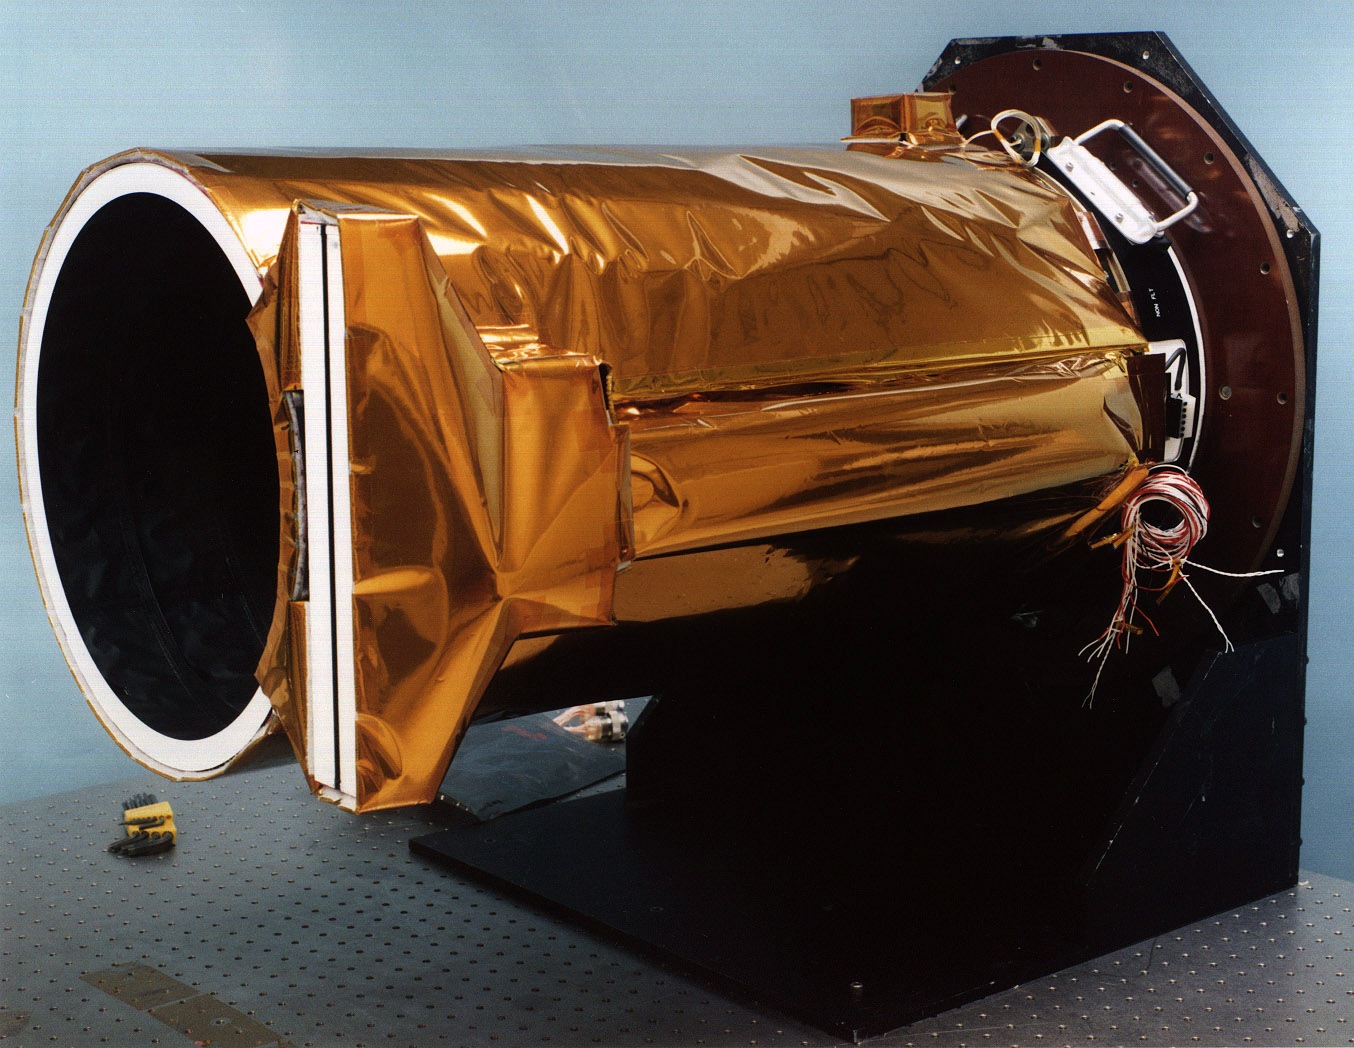 A long, metallic, barrel-shaped instrument, oriented horizontally, points toward the left side of the frame, on a slight diagonal toward the viewer, showing a pitch-black opening that looks like the hole of a deep well. Its sides are covered in what looks like thin, gold foil, it has a bundle of wires protruding from its base, and it's attached to a circular brown metal base at the right rear of the image.